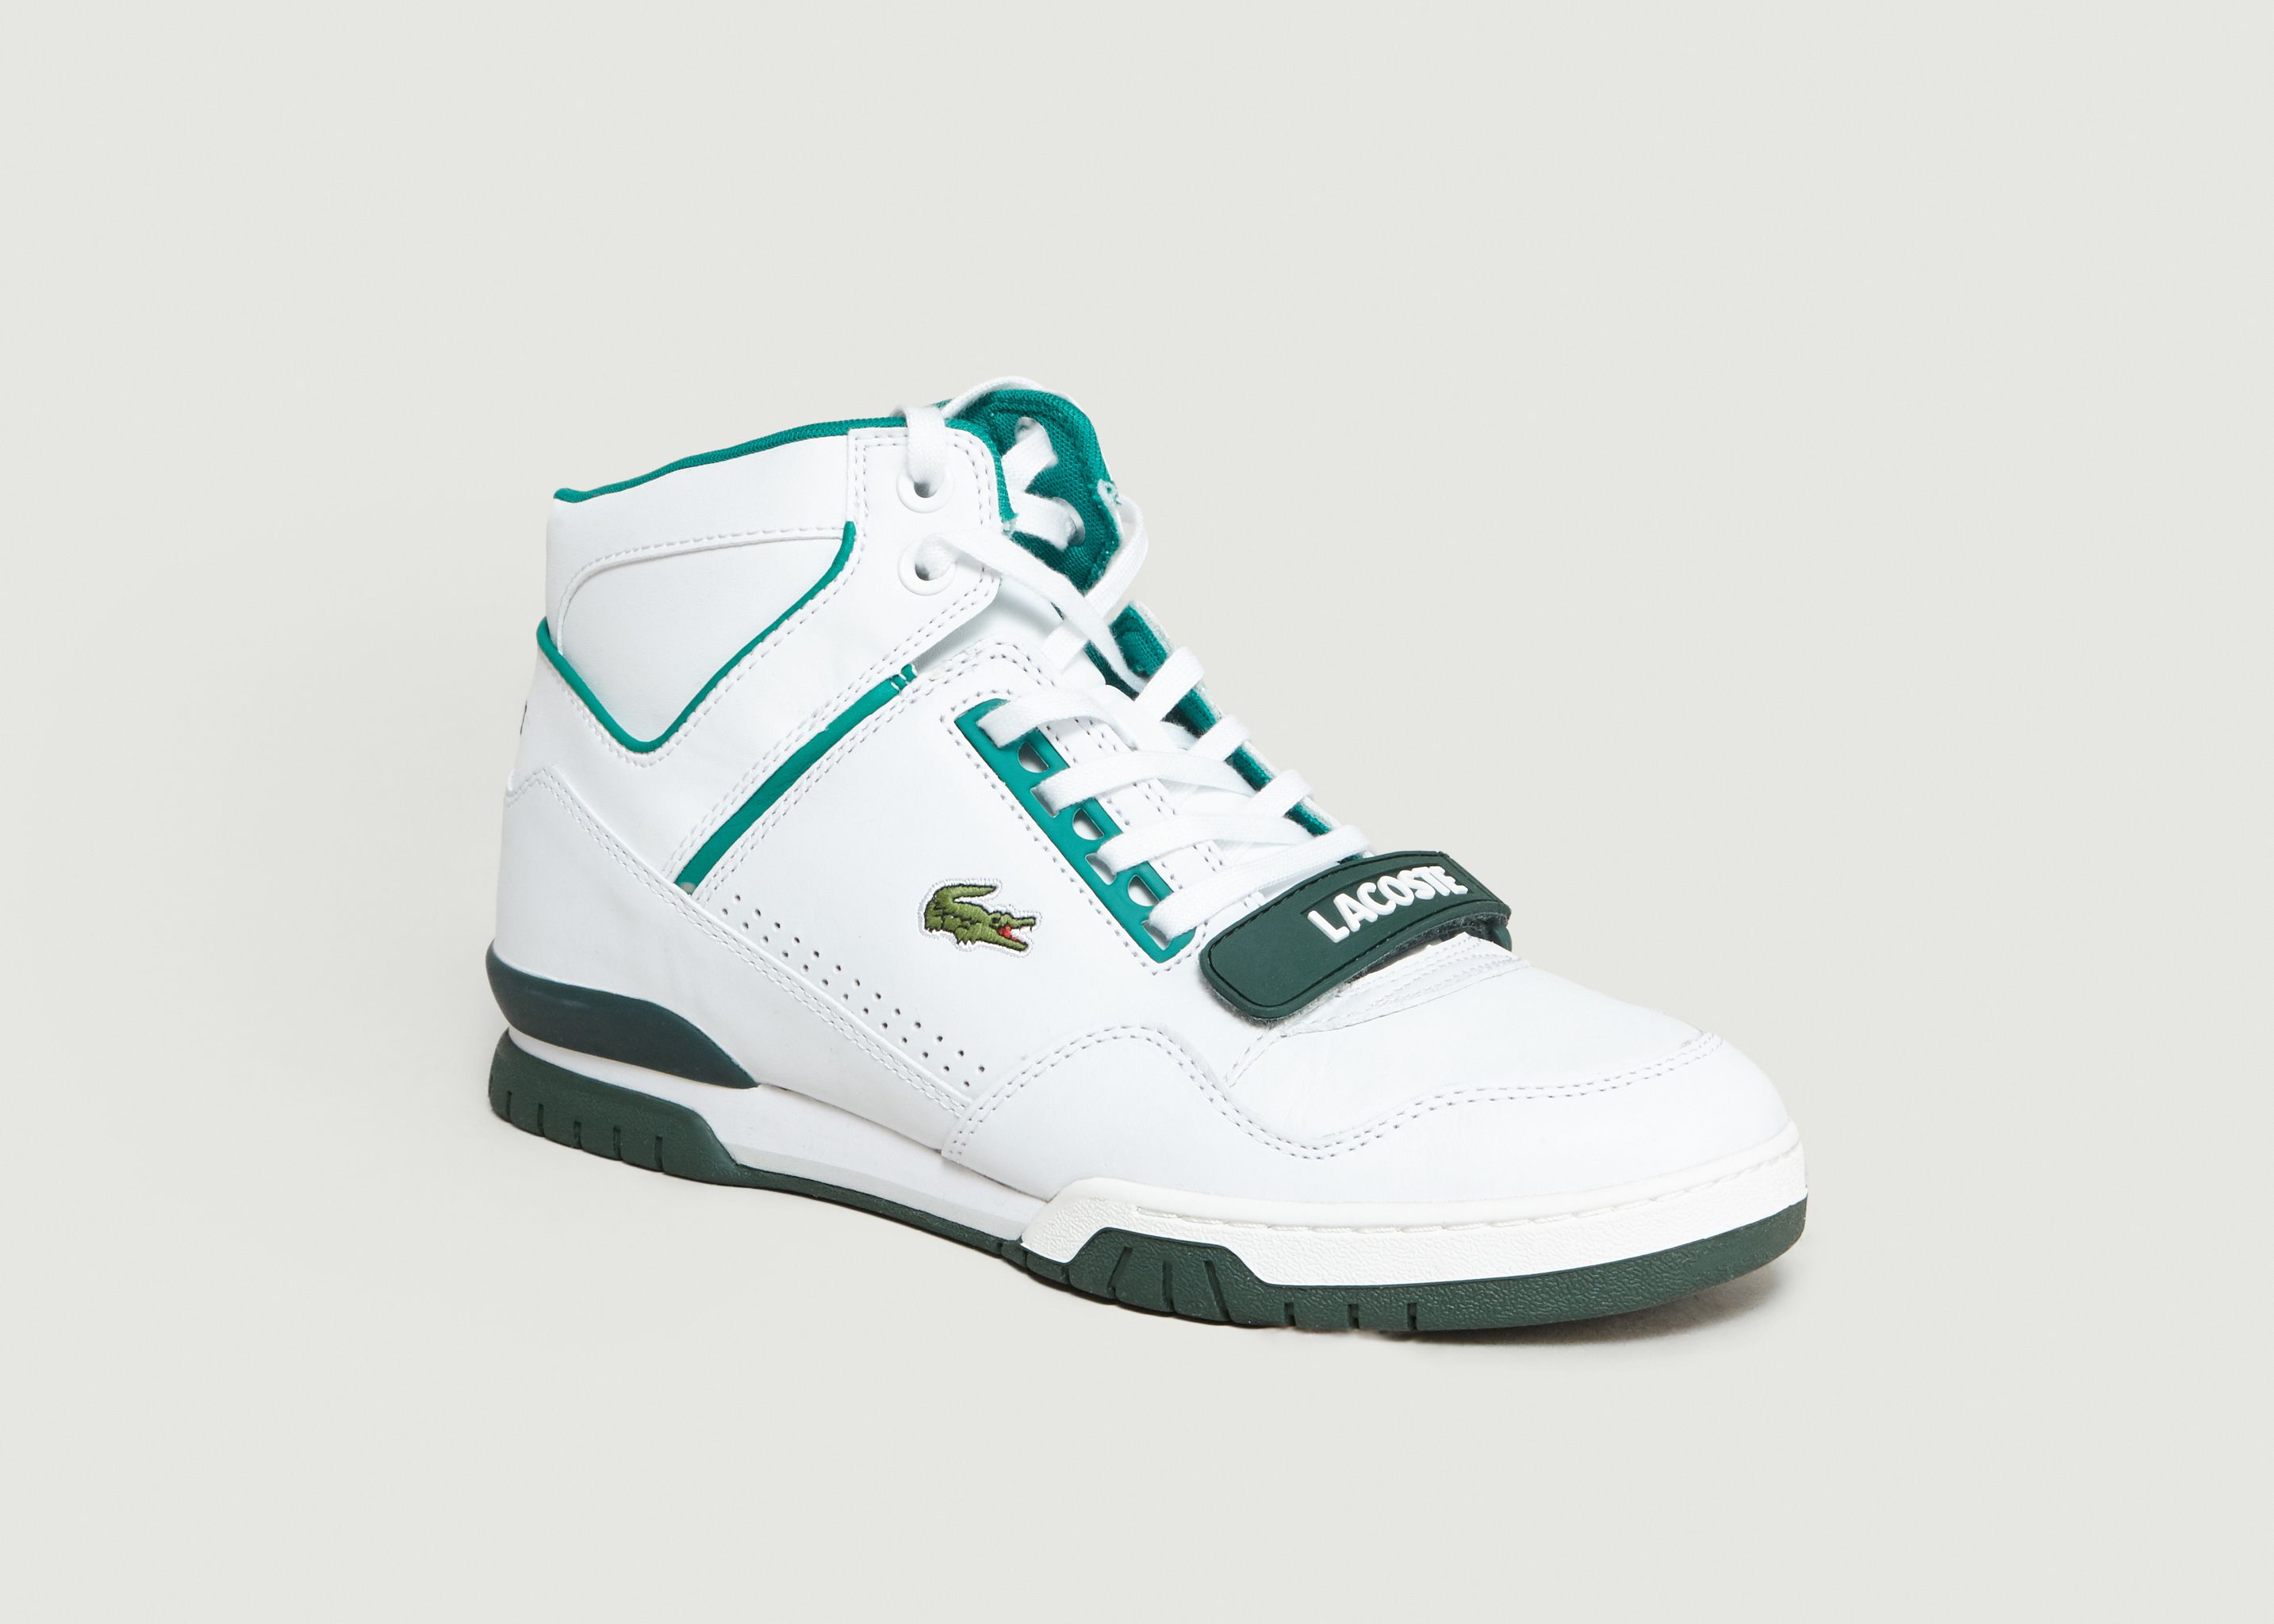 lacoste mid top trainers